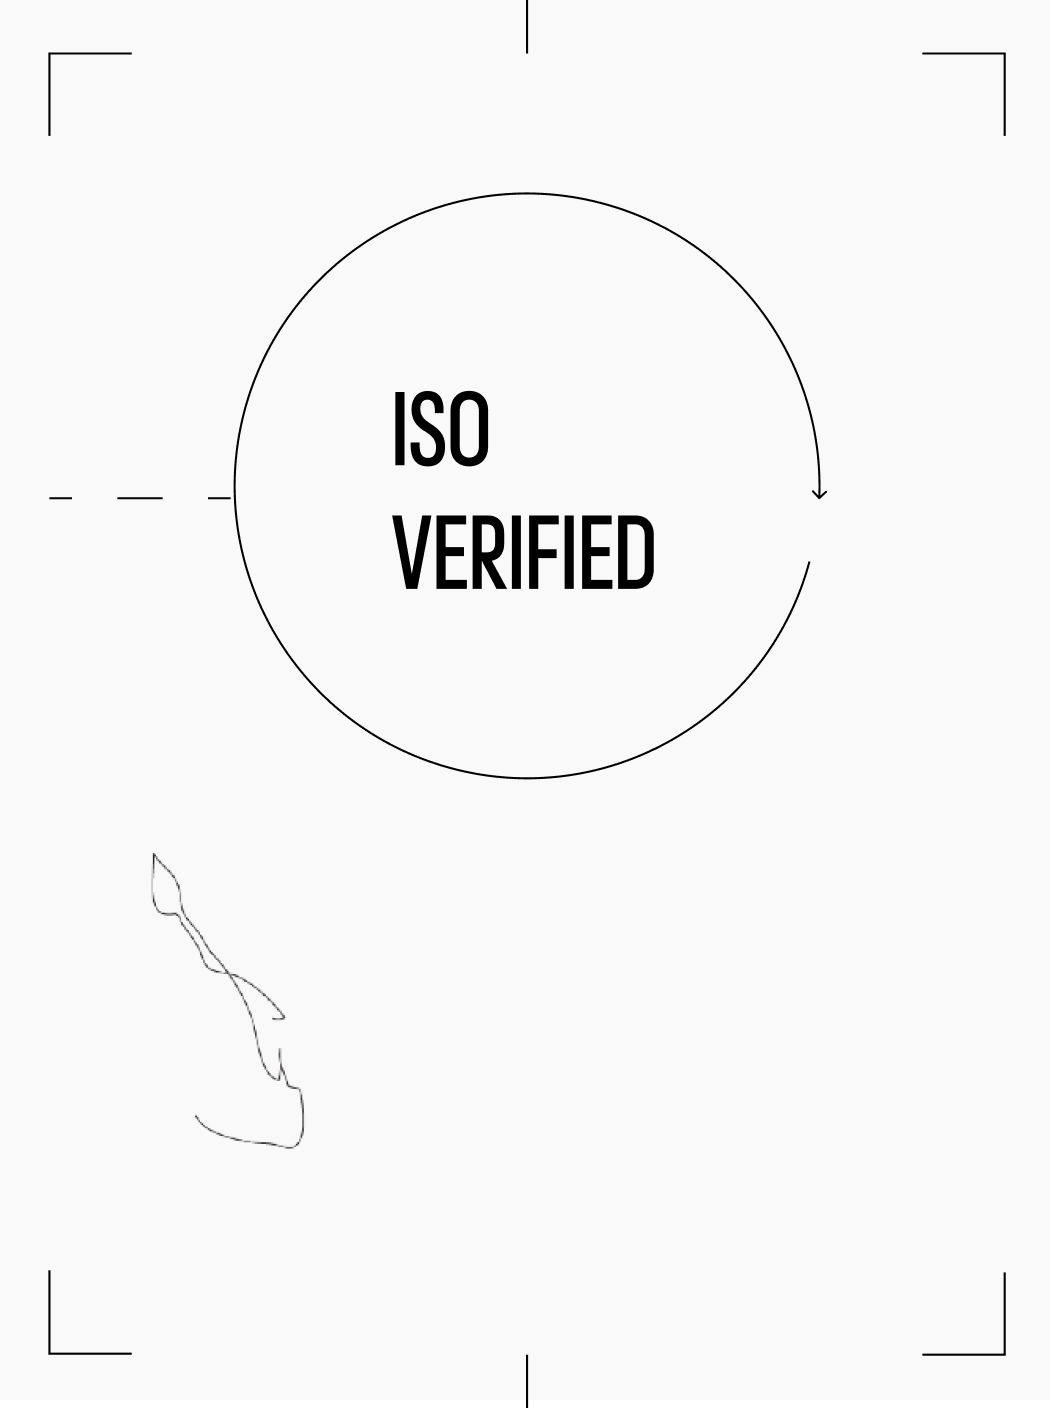 a statement saying "iso verified"